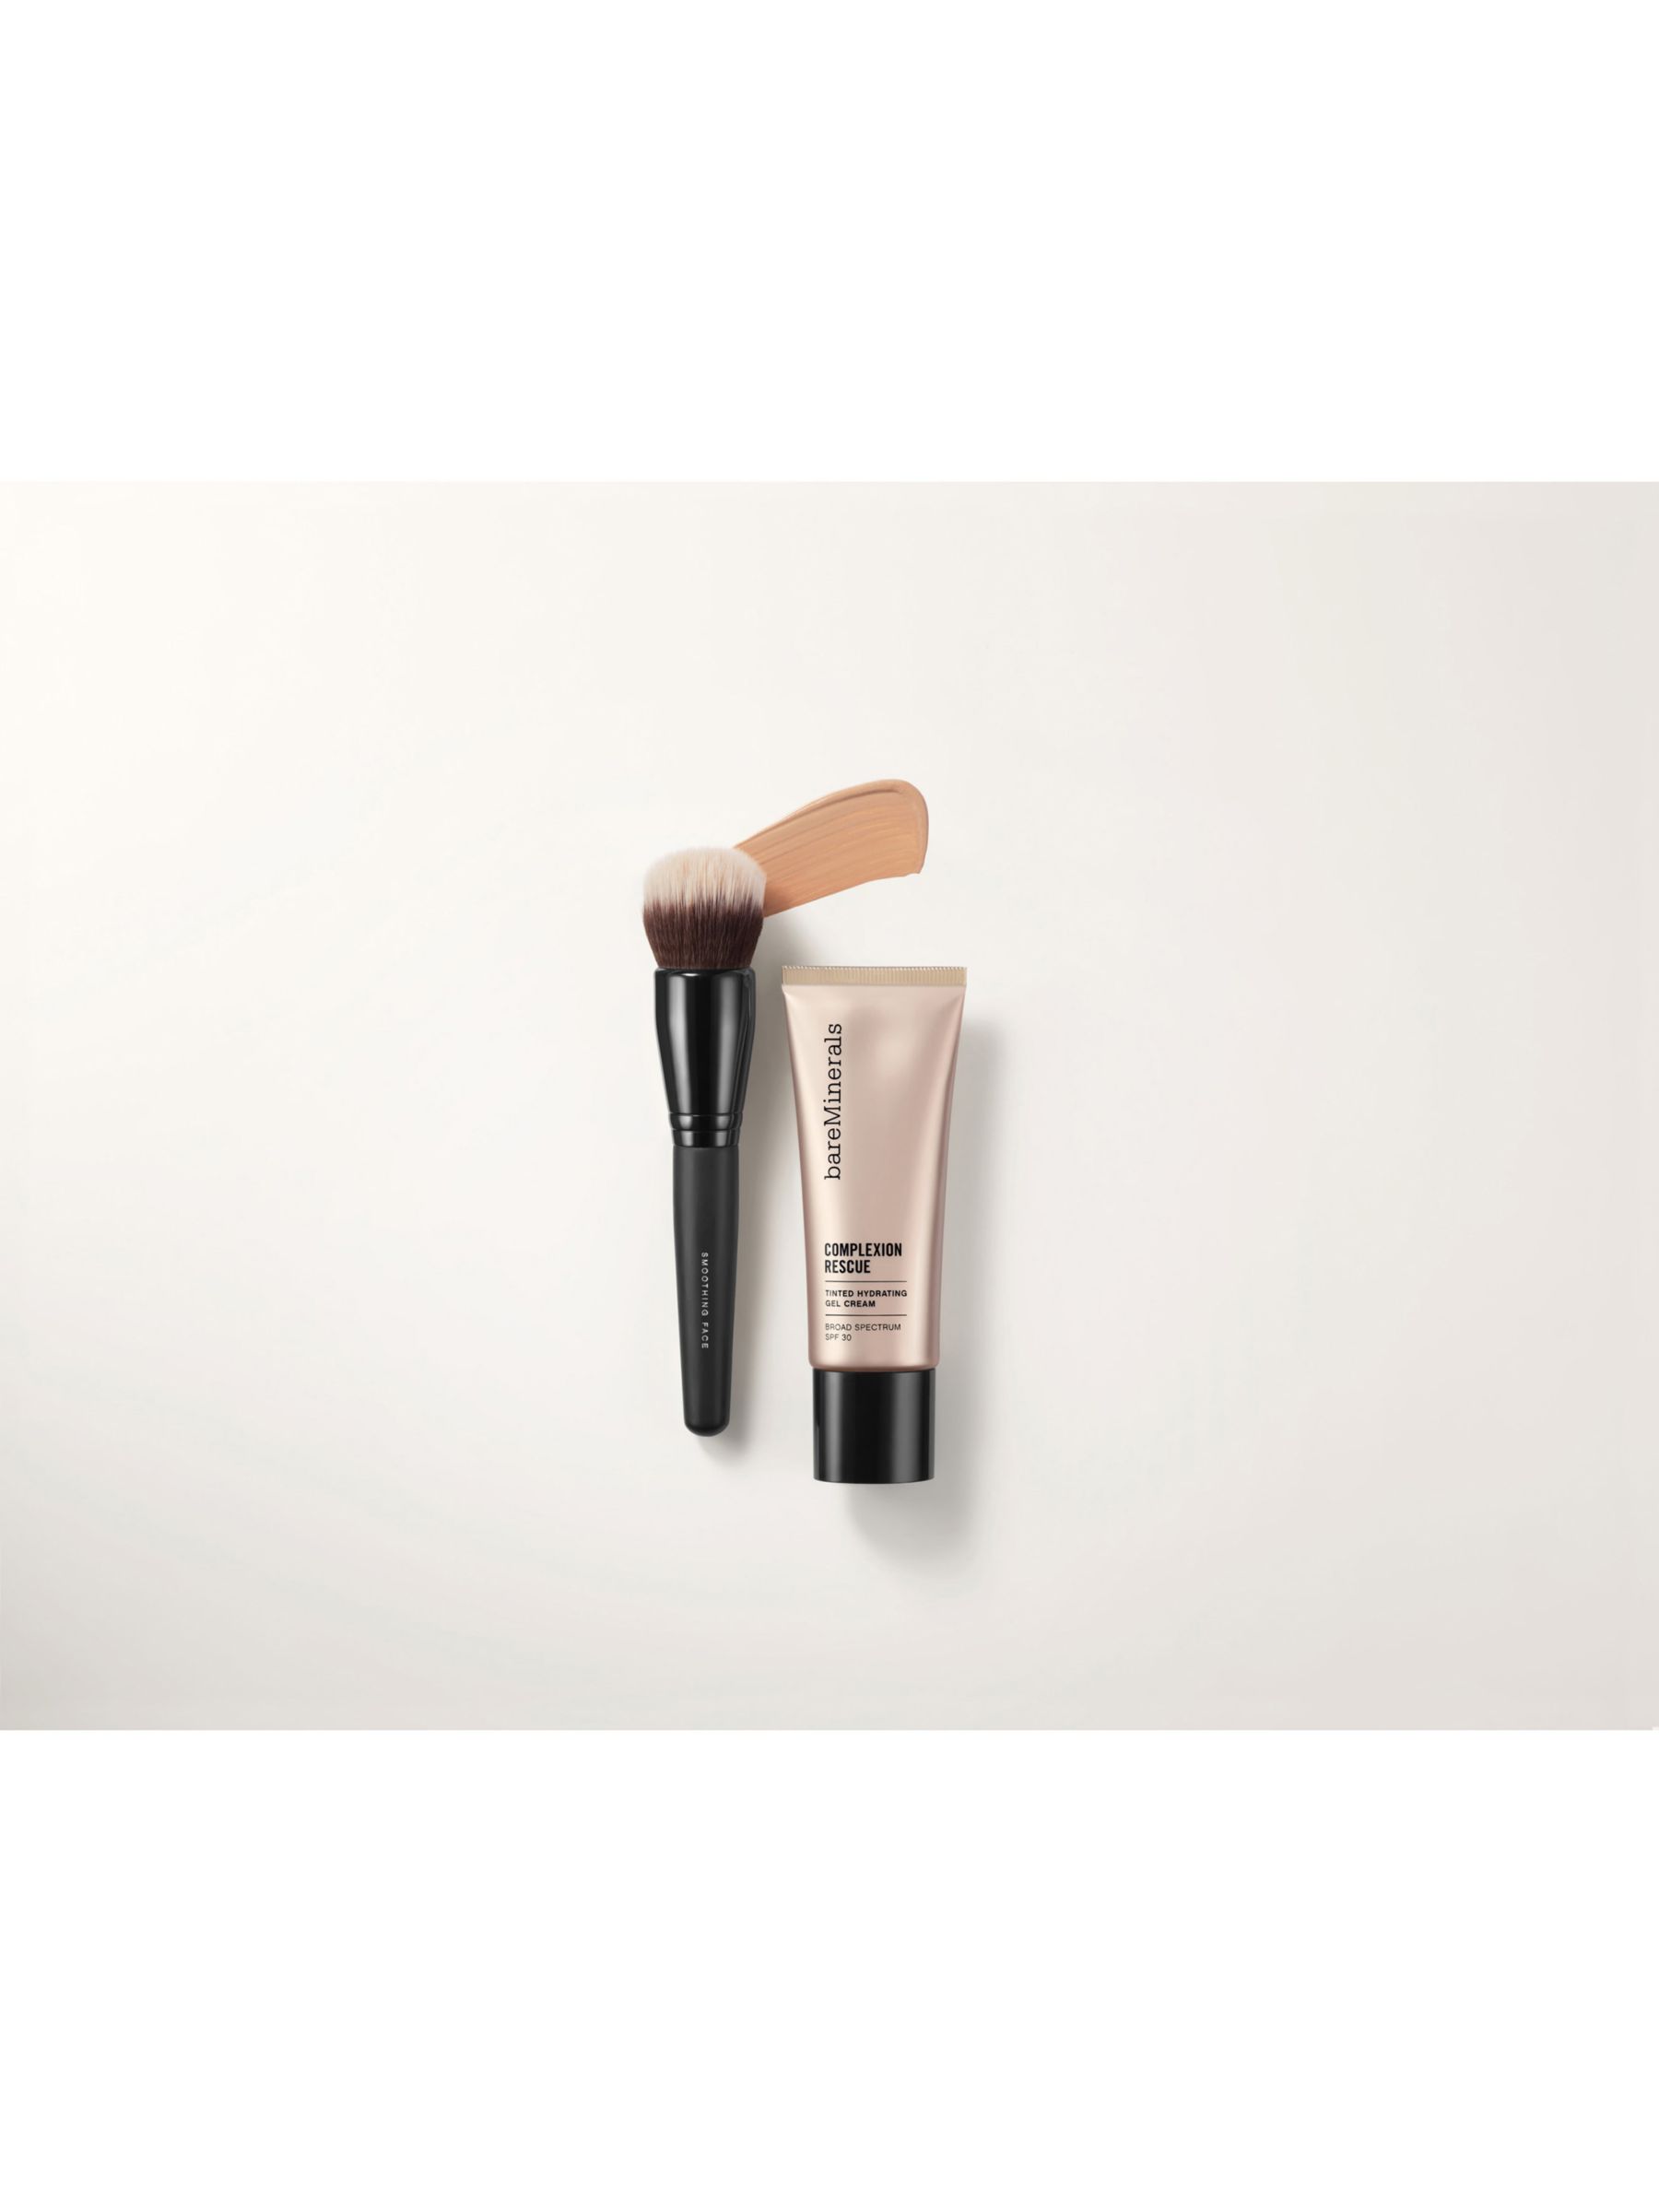 bareMinerals COMPLEXION RESCUE Tinted Hydrating Gel Cream SPF 30, Cashew 6